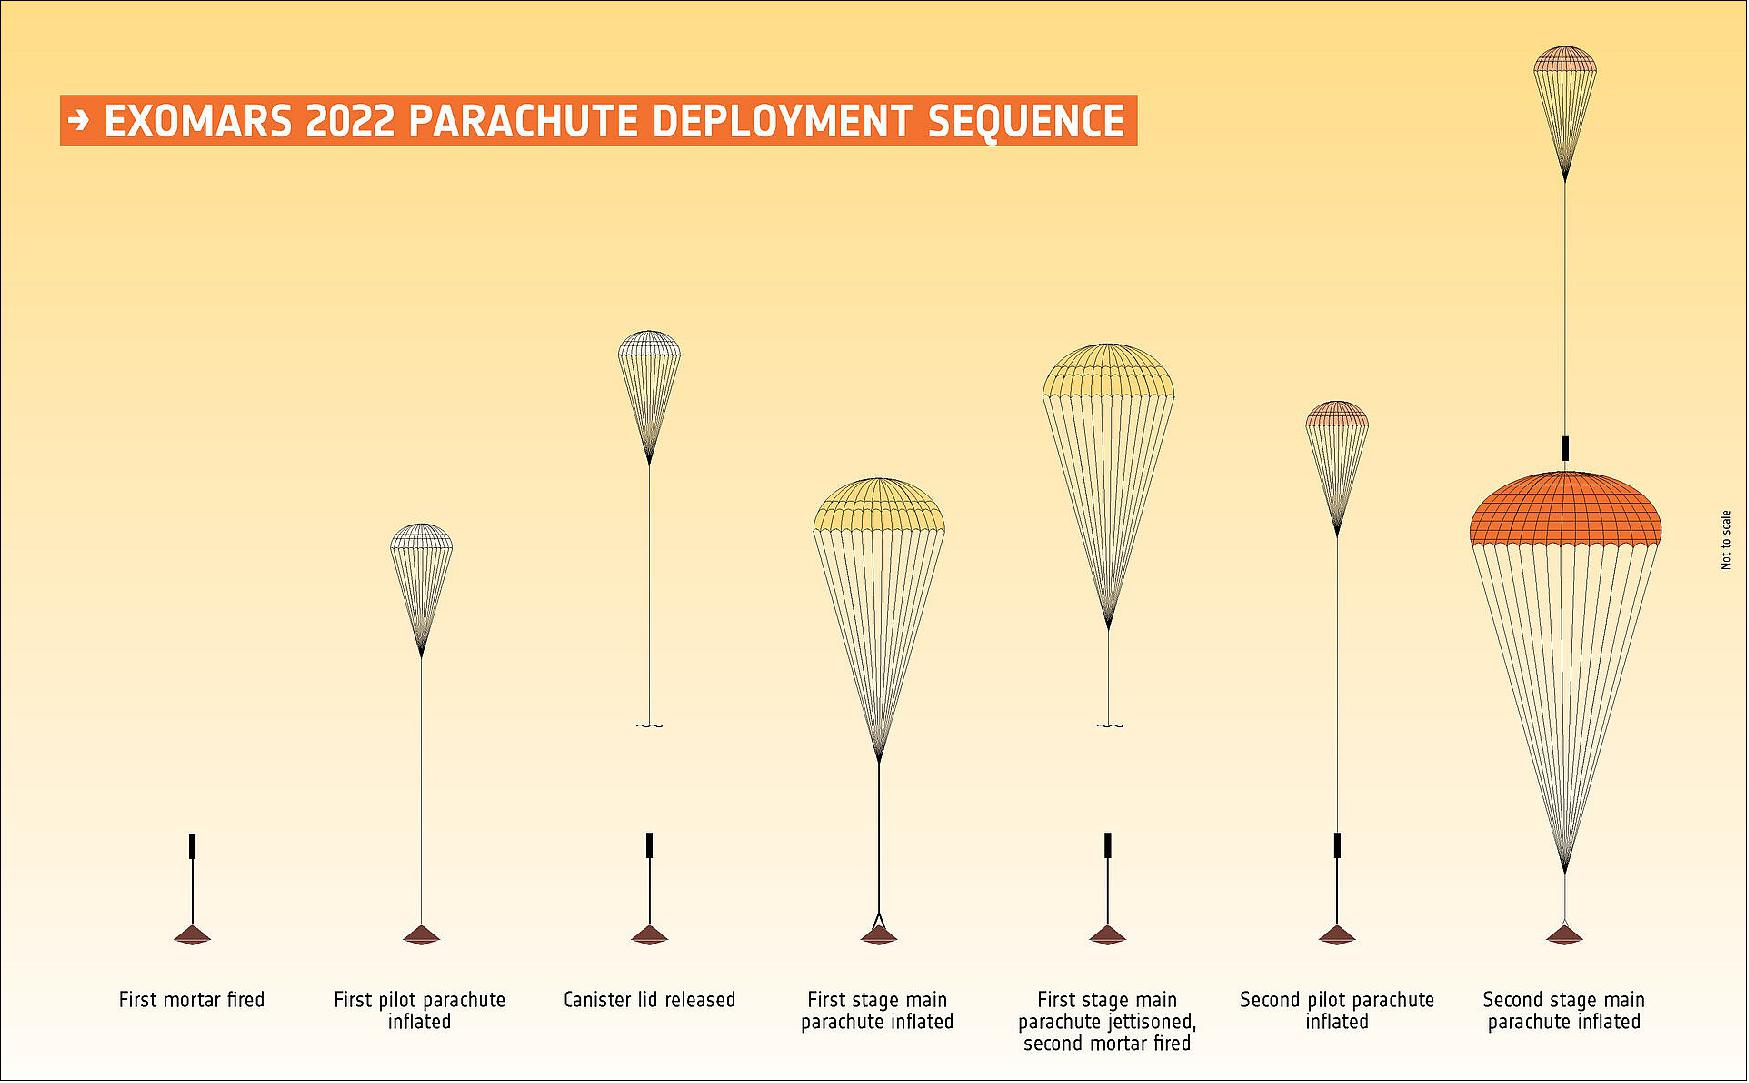 Figure 14: The ExoMars 2022 parachute deployment sequence that will deliver a surface platform and rover to the surface of Mars in 2023 (following launch in 2022). The graphic is not to scale, and the colours of the parachutes are for illustrative purposes only. - The graphic highlights the main events concerning the parachutes, a sequence that is initiated after significant slowing of the 3.8 m-wide entry module in the atmosphere with the aeroshell’s heatshields. Then the first pilot parachute is deployed, and shortly after the first main stage parachute, which measures 15 m in diameter and has a disc-gap band design. It will open while the module is still travelling at supersonic speed and will be jettisoned prior to the deployment of the second pilot chute and second stage main parachute once at subsonic speeds. The second stage main parachute has a ring-slot design and is 35 m in diameter, the largest to ever fly on Mars. - The second pilot chute remains attached to the main parachute in order to prevent rebound of the deployed parachute. During latter stages of the descent (not pictured) the aeroshell’s front heatshield will be discarded, and the landing platform will be released for its final descent and propulsive braking phase. Once safely on the surface, it will subsequently deploy ramps for the rover to drive down and on to Mars (image credit: ESA)